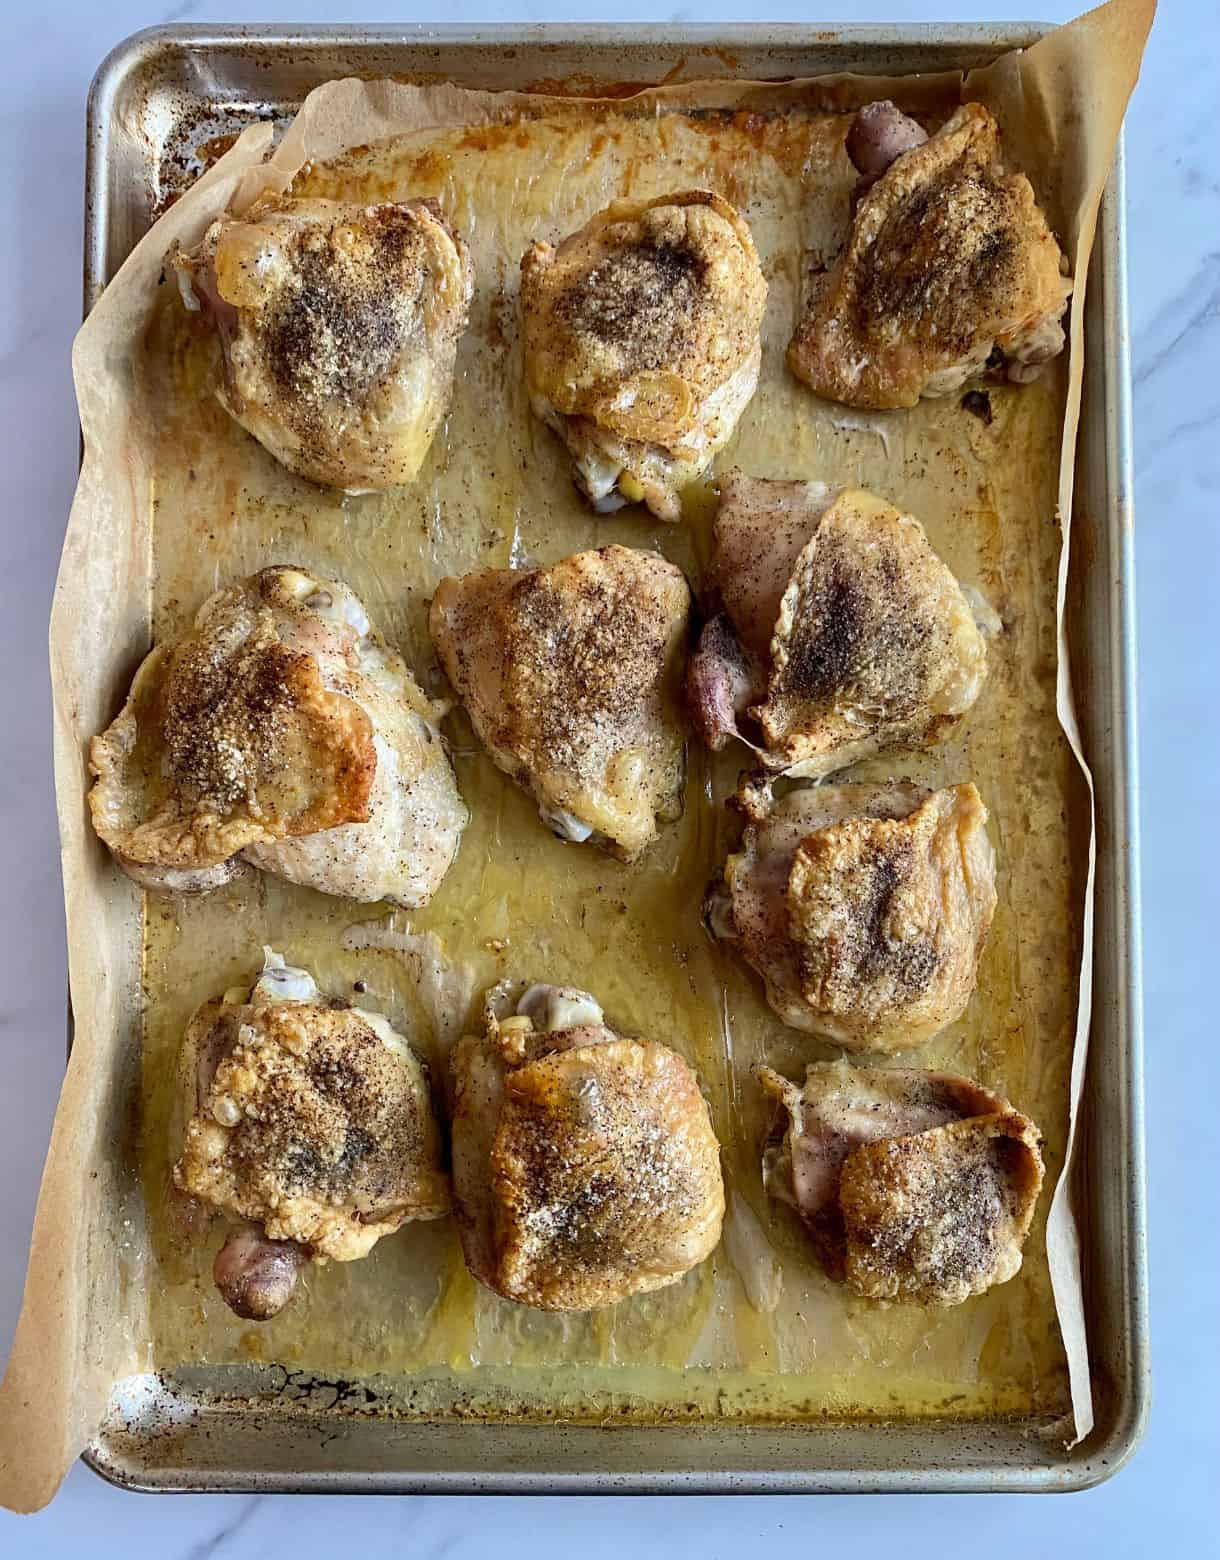 A sheet pan lined with parchment paper with cooked chicken thighs.